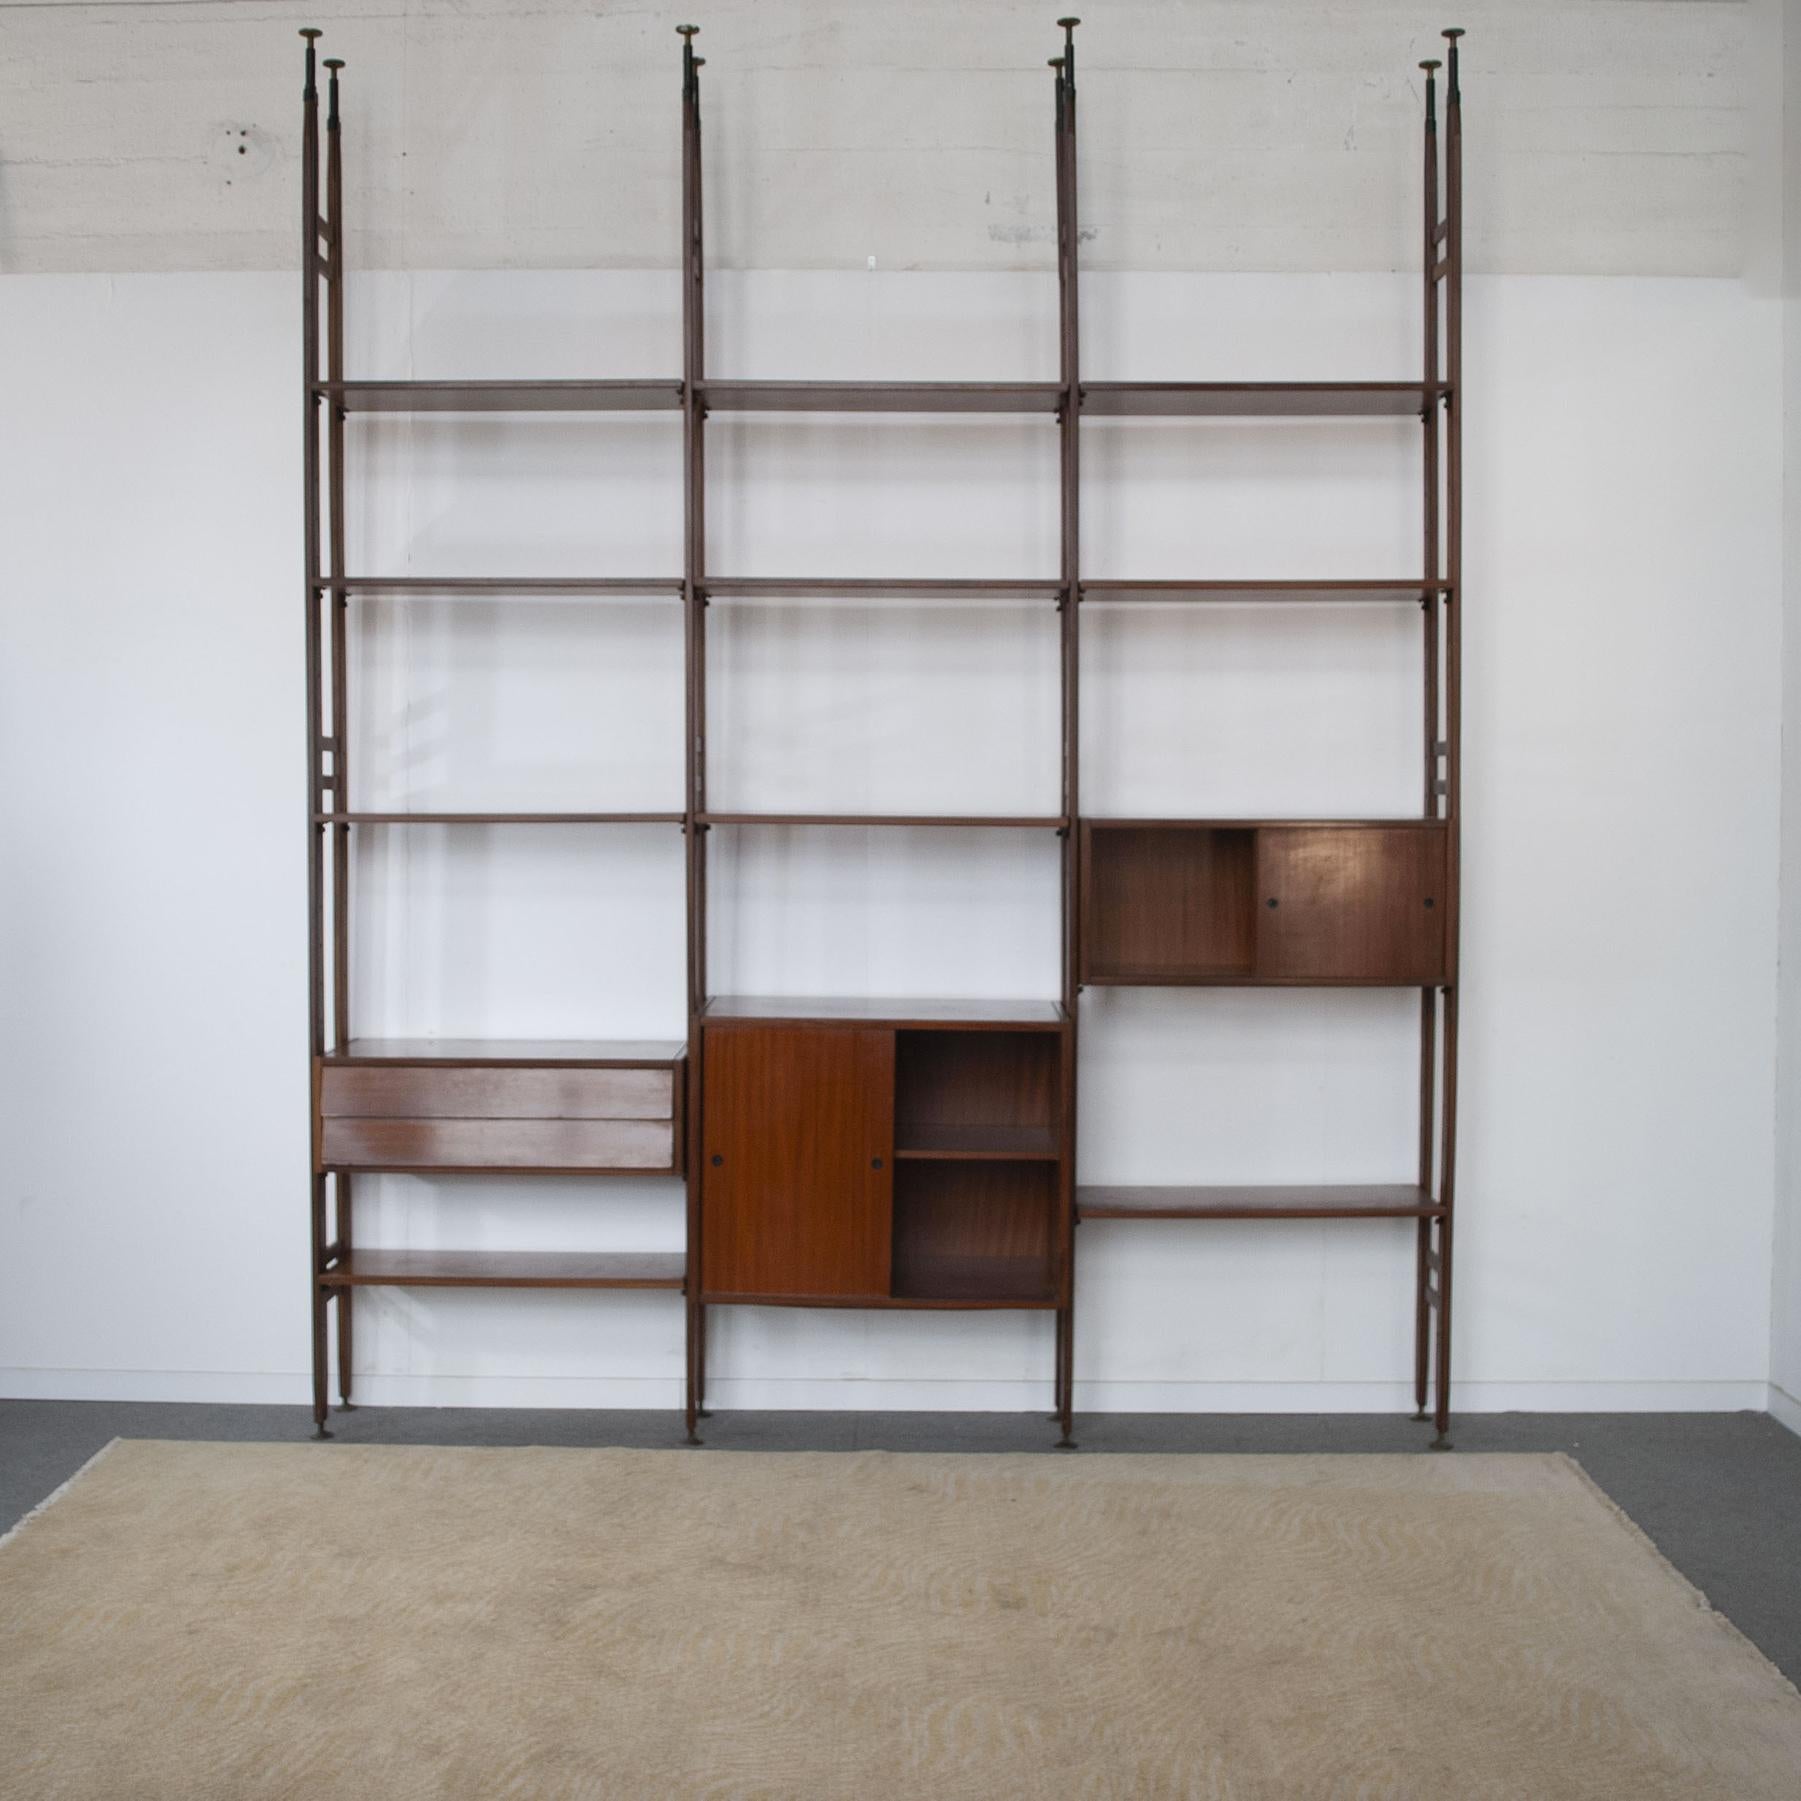 Three-bay wooden bookcase with interchangeable modules and group of two drawers, Italian production 1960s.